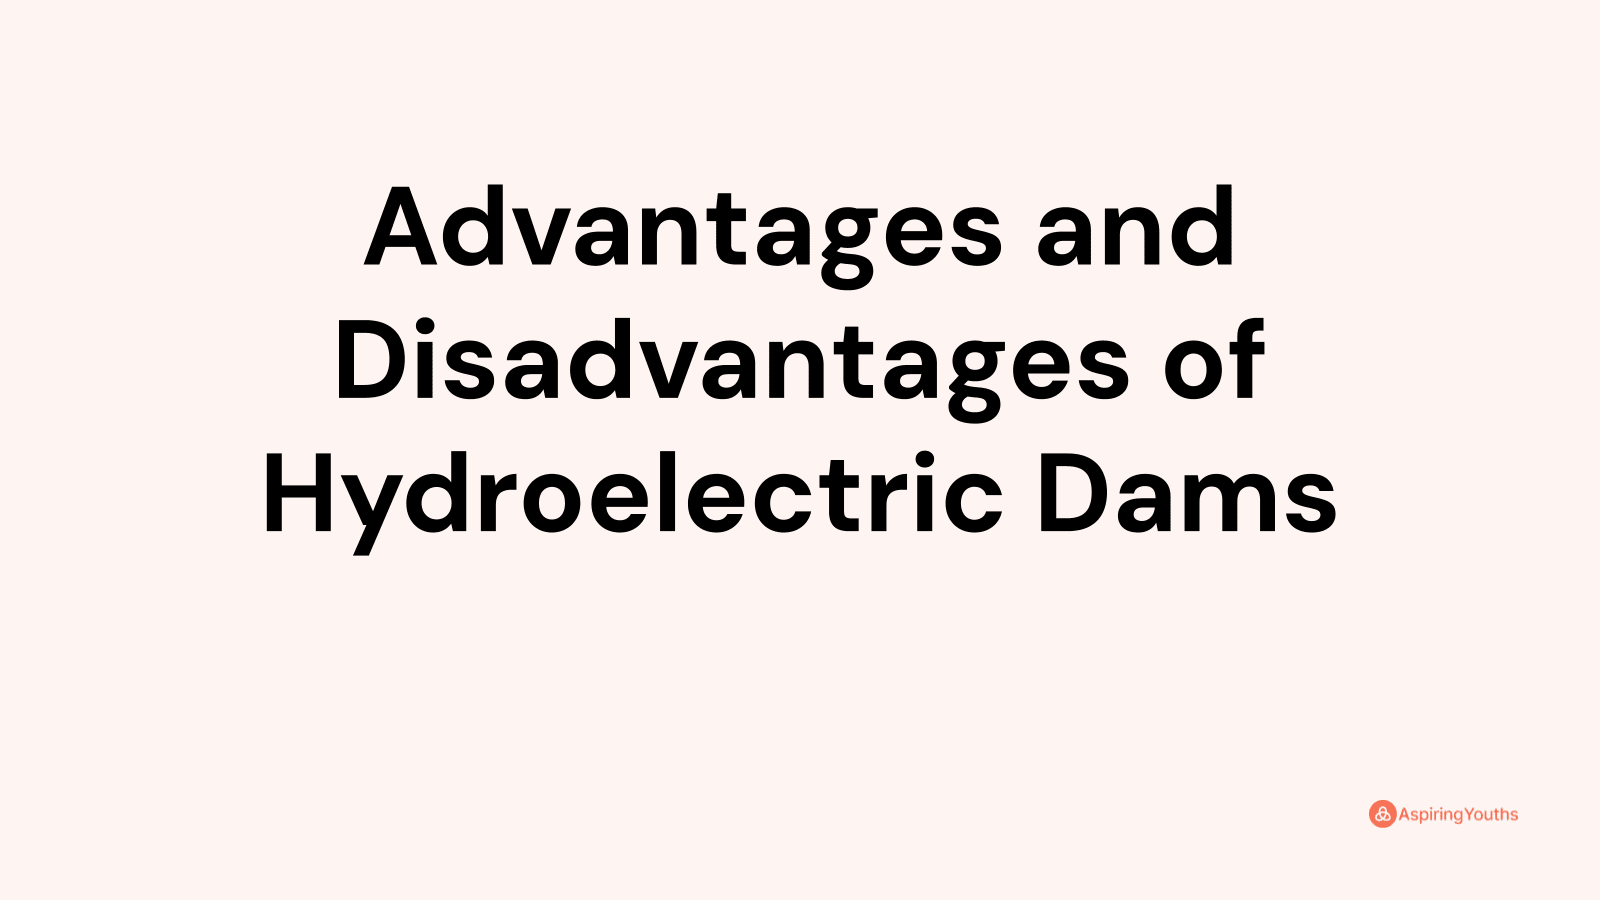 Advantages and Disadvantages of Hydroelectric Dams